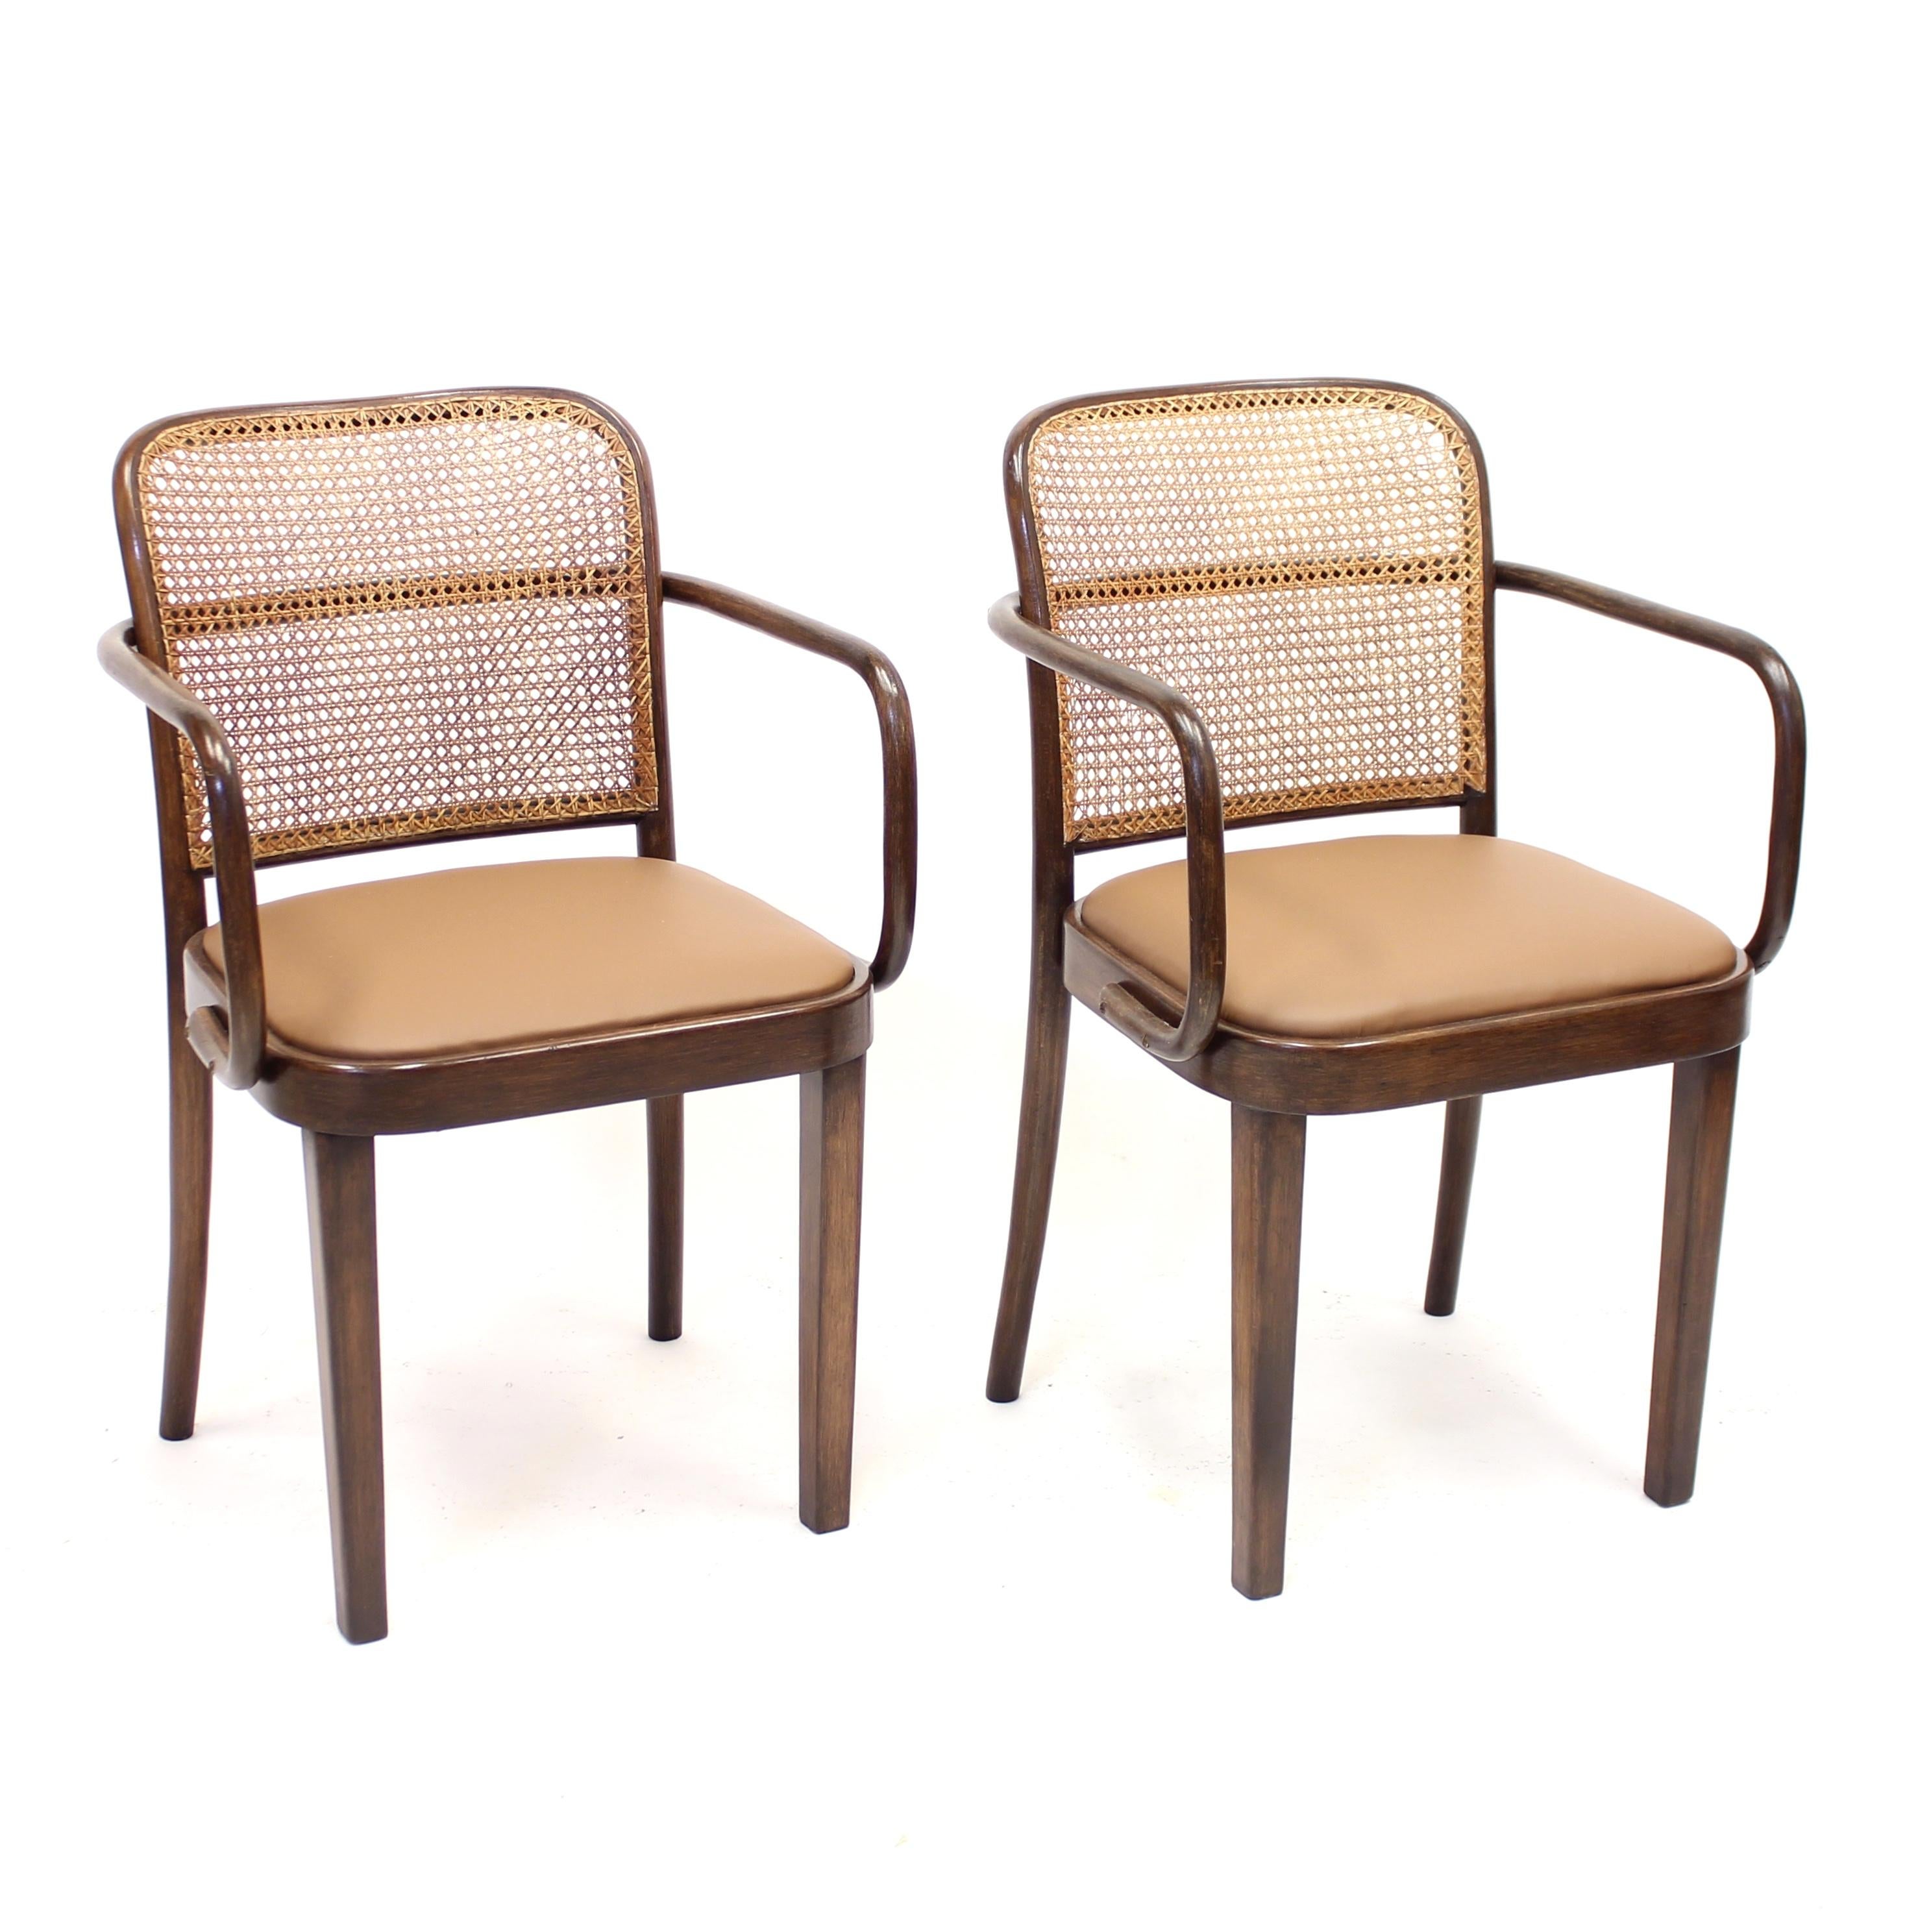 Pair of bent wood armchairs, model A 811/1 F designed by Josef Frank or Josef Hoffamnn in the 1930s. It's not established to this day which of the the two gentlemen who actually designed this model, who also exist without the armrests. The